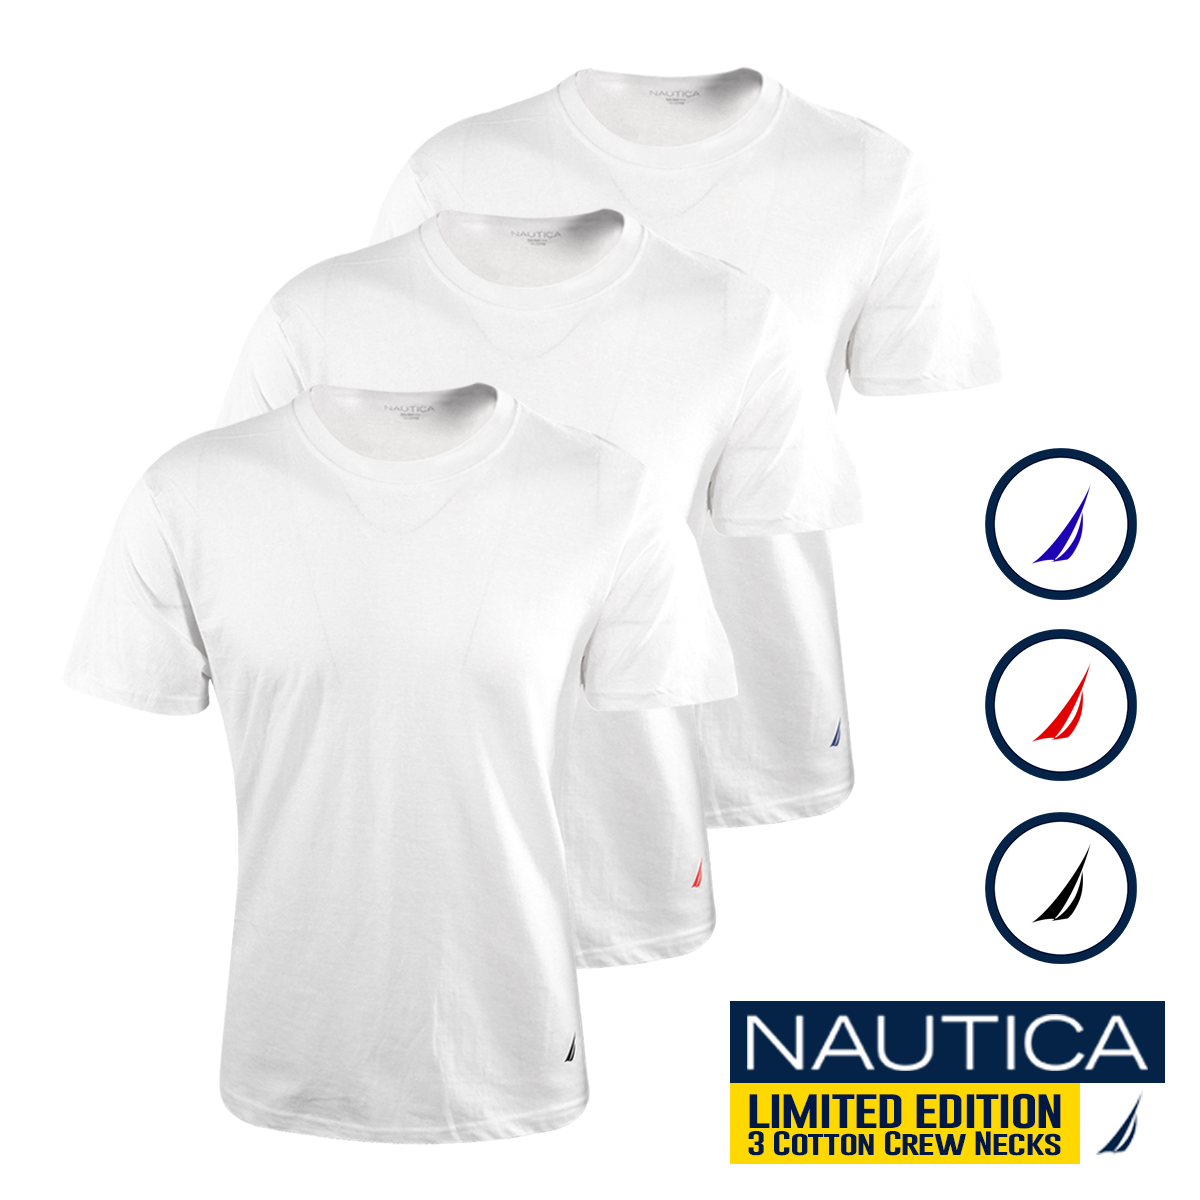 Nautica Men's 3 Pack Limited Edition Crew Neck S/S T-Shirt